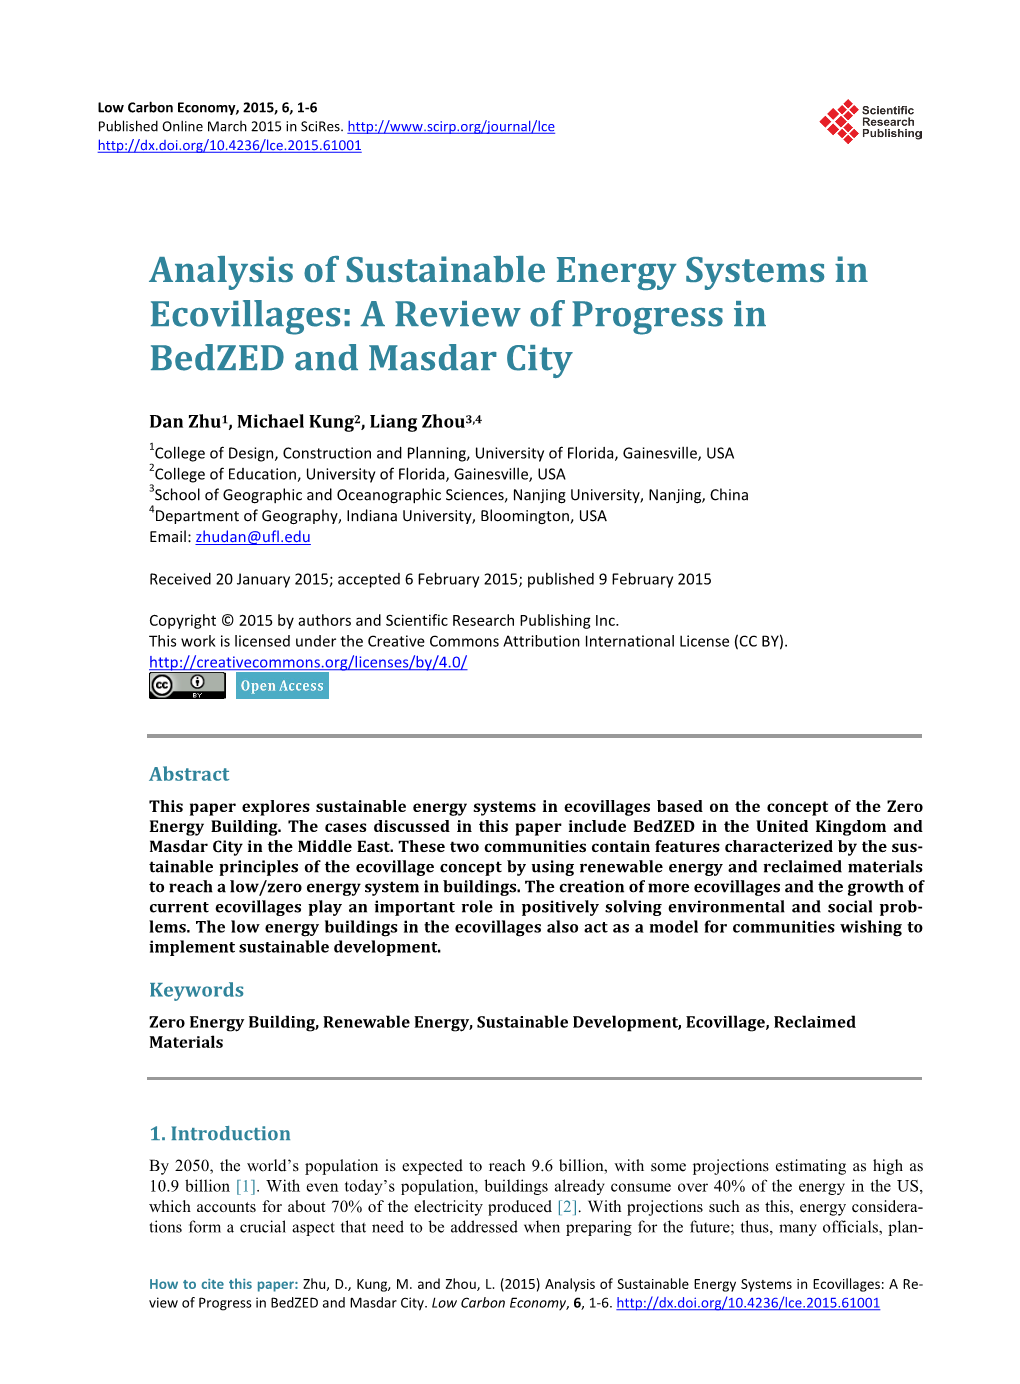 A Review of Progress in Bedzed and Masdar City